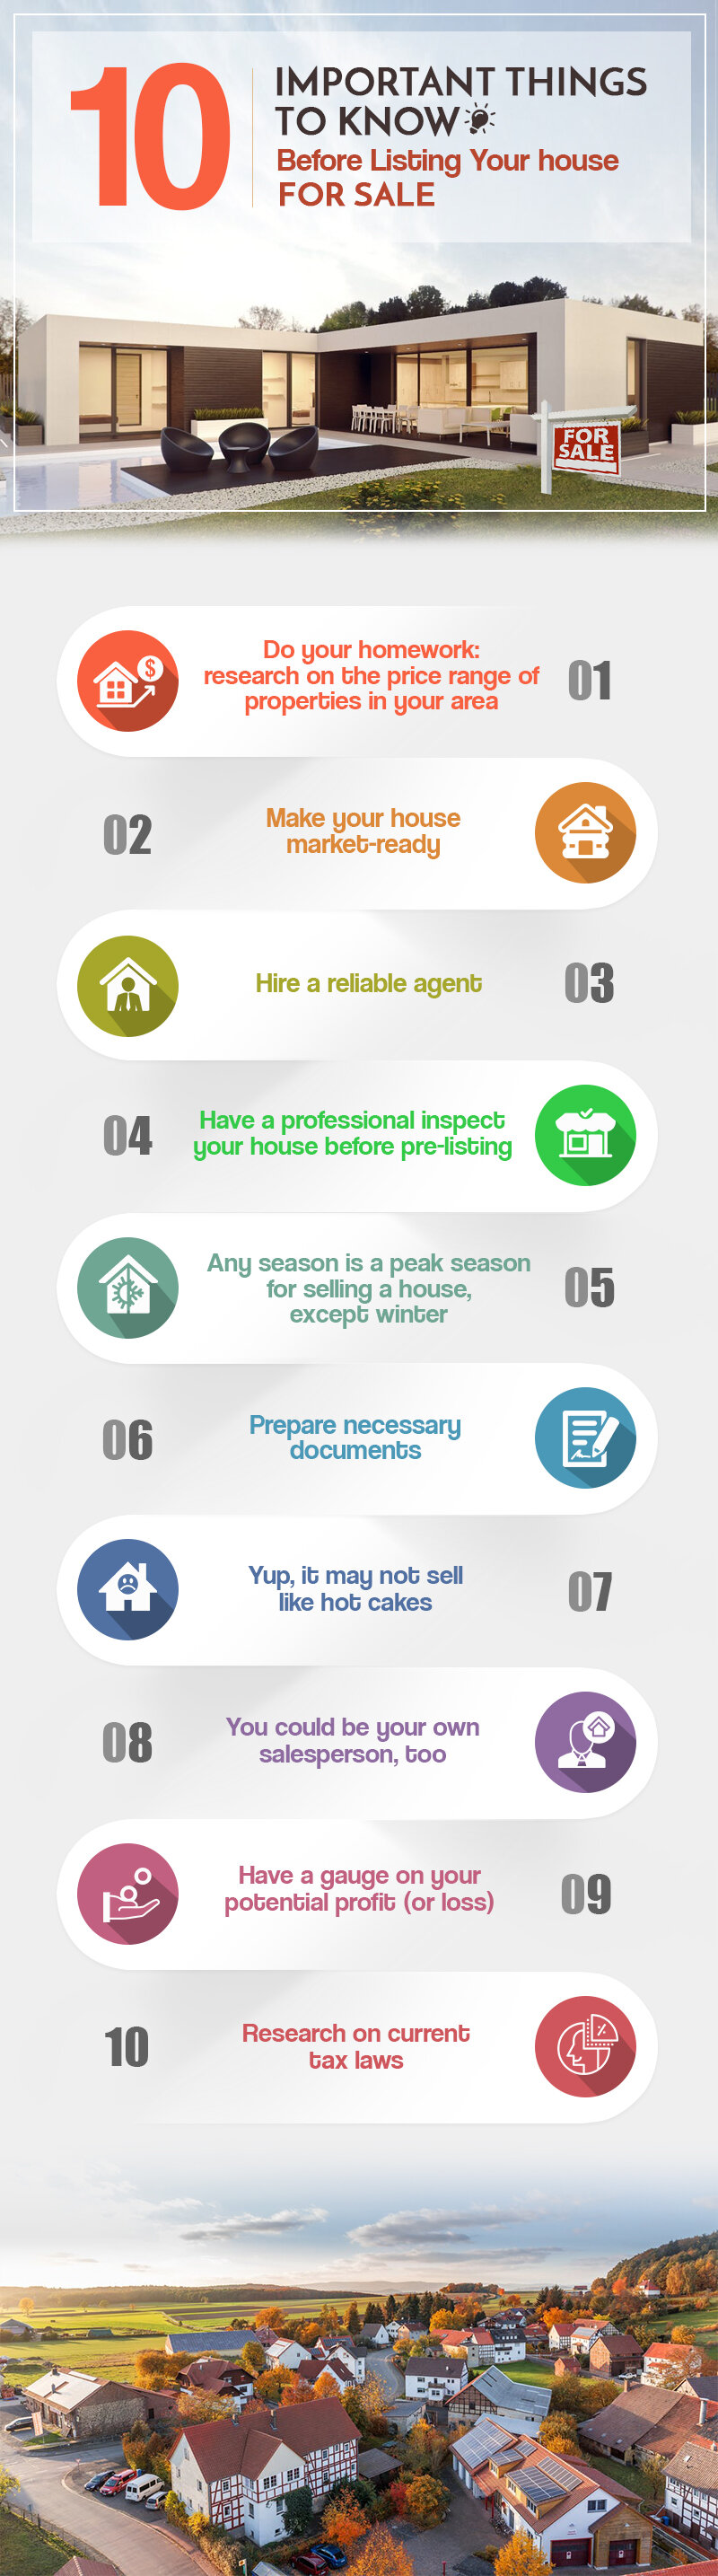 10 Important Things To Know Before Listing Your House For Sale